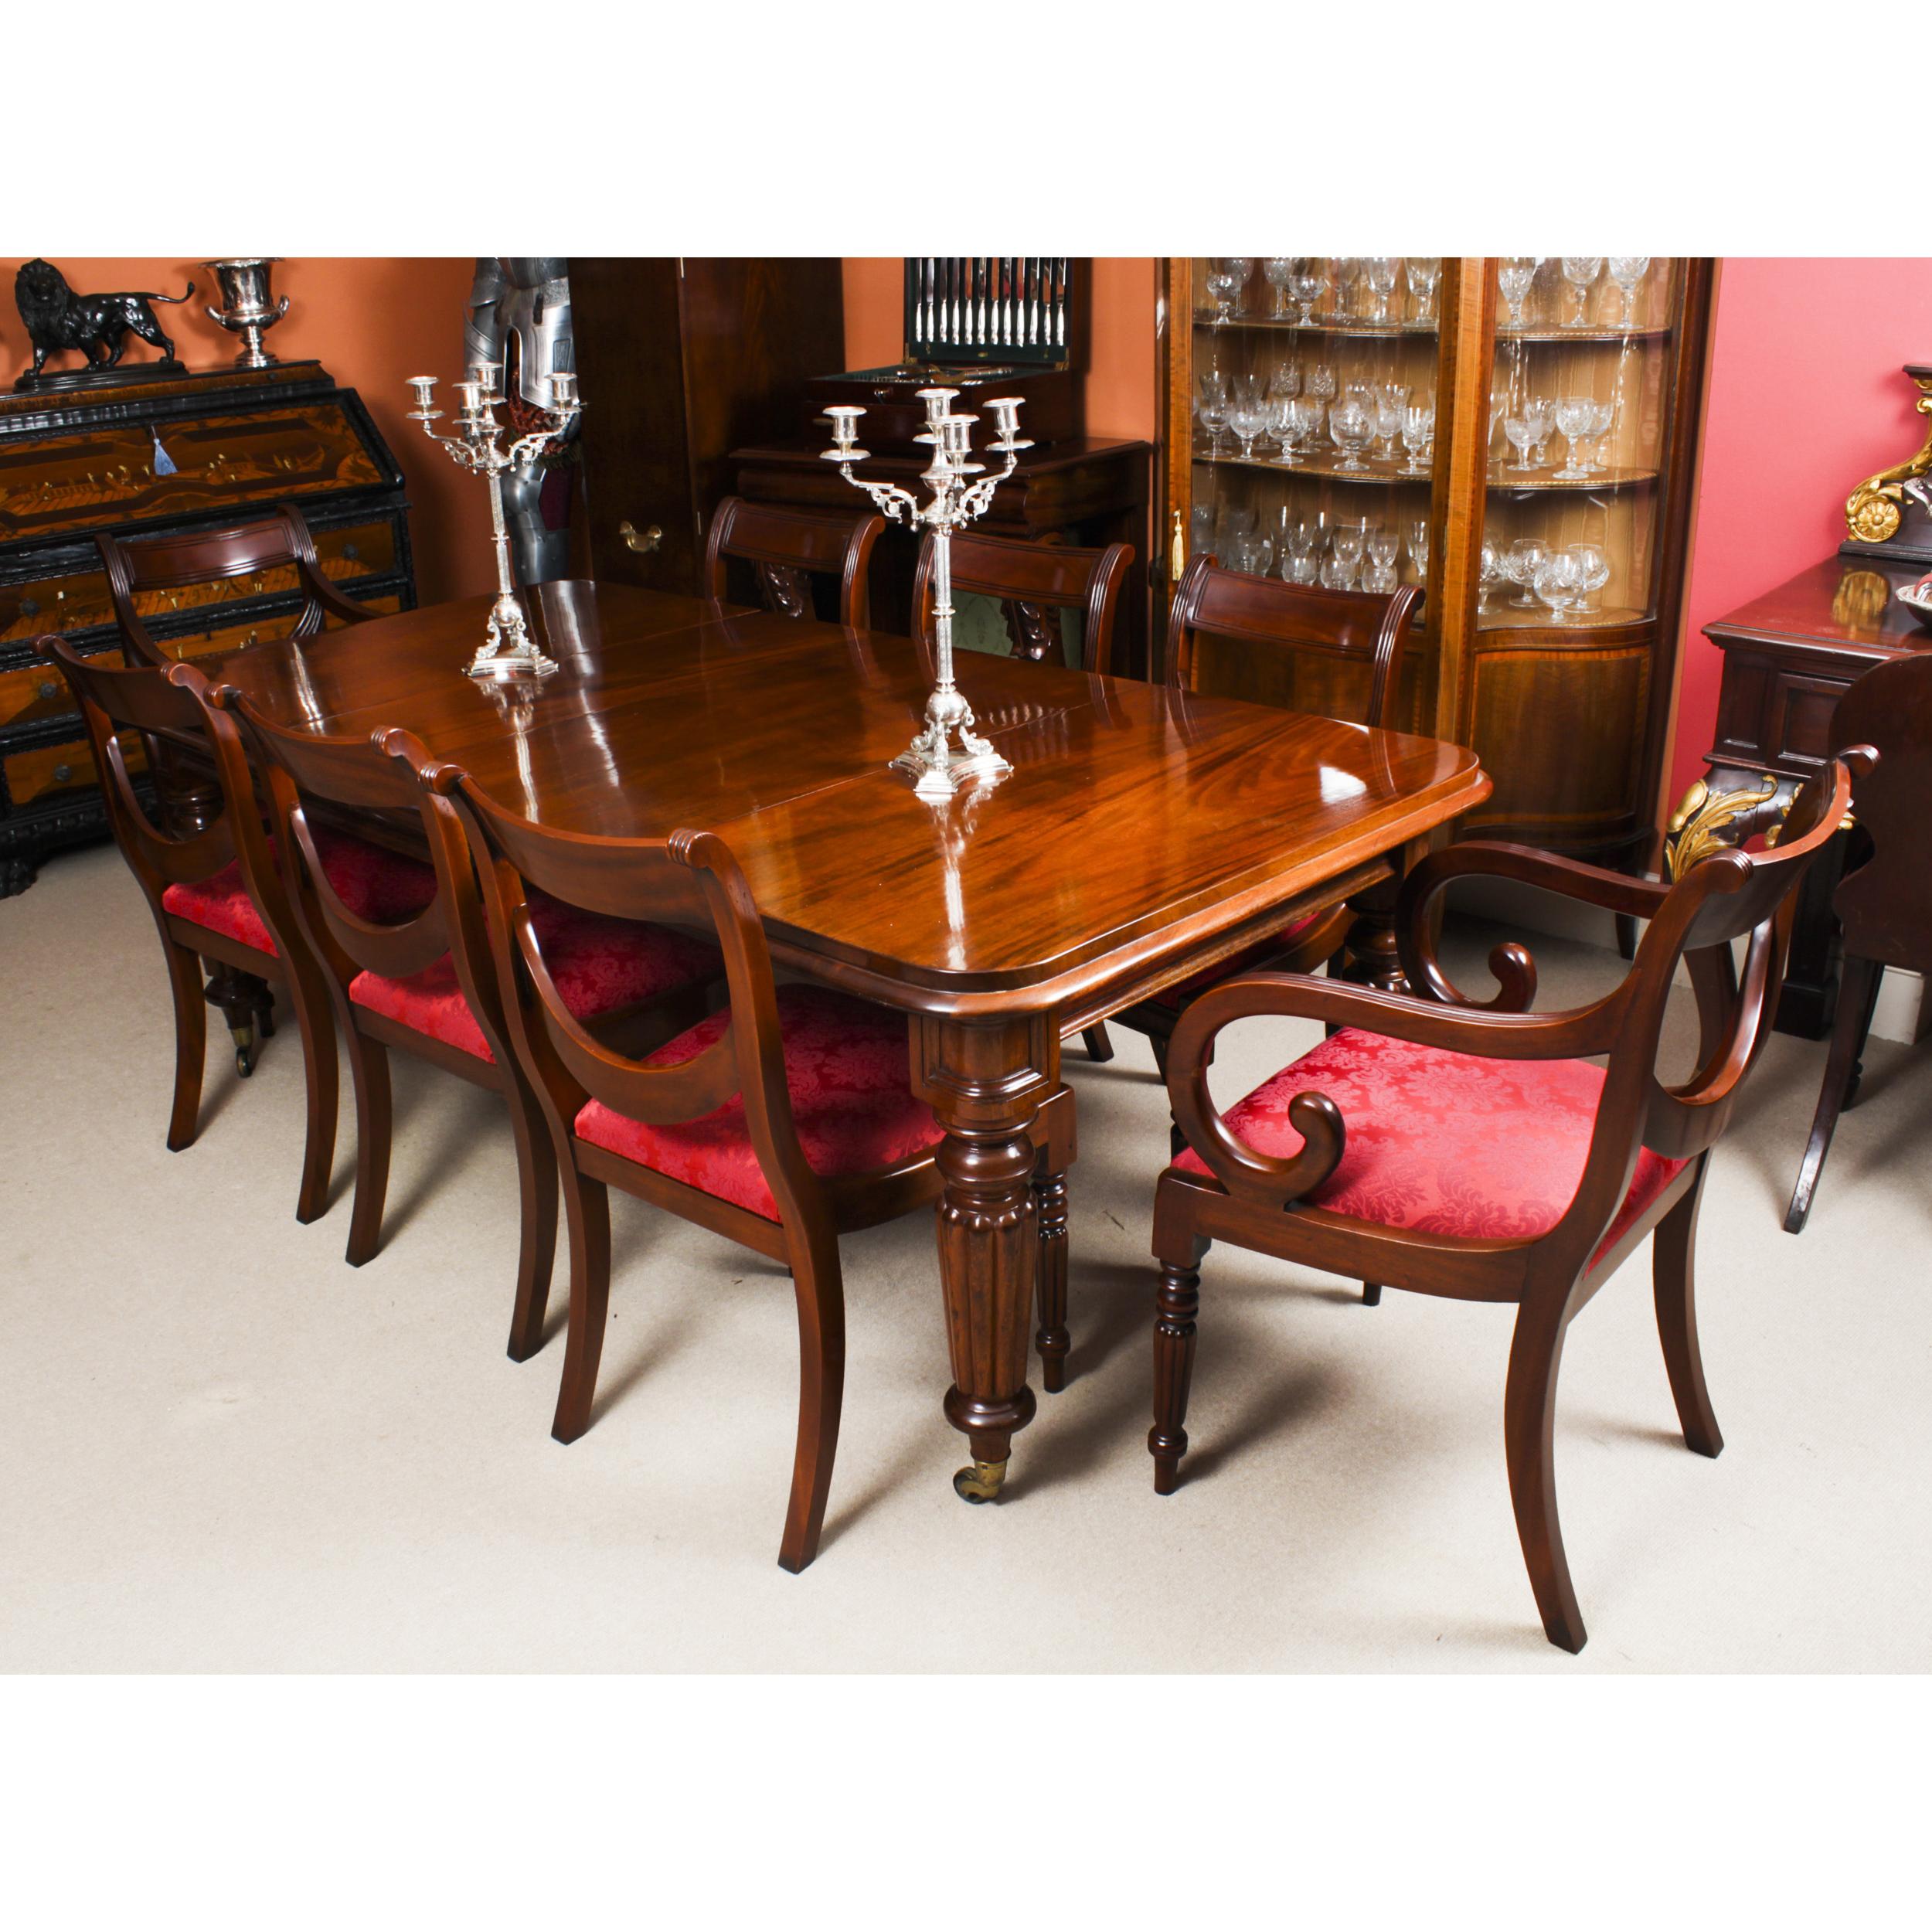 English Antique Early Victorian Extending Dining Table by Gillows 19th C & 8 Chairs